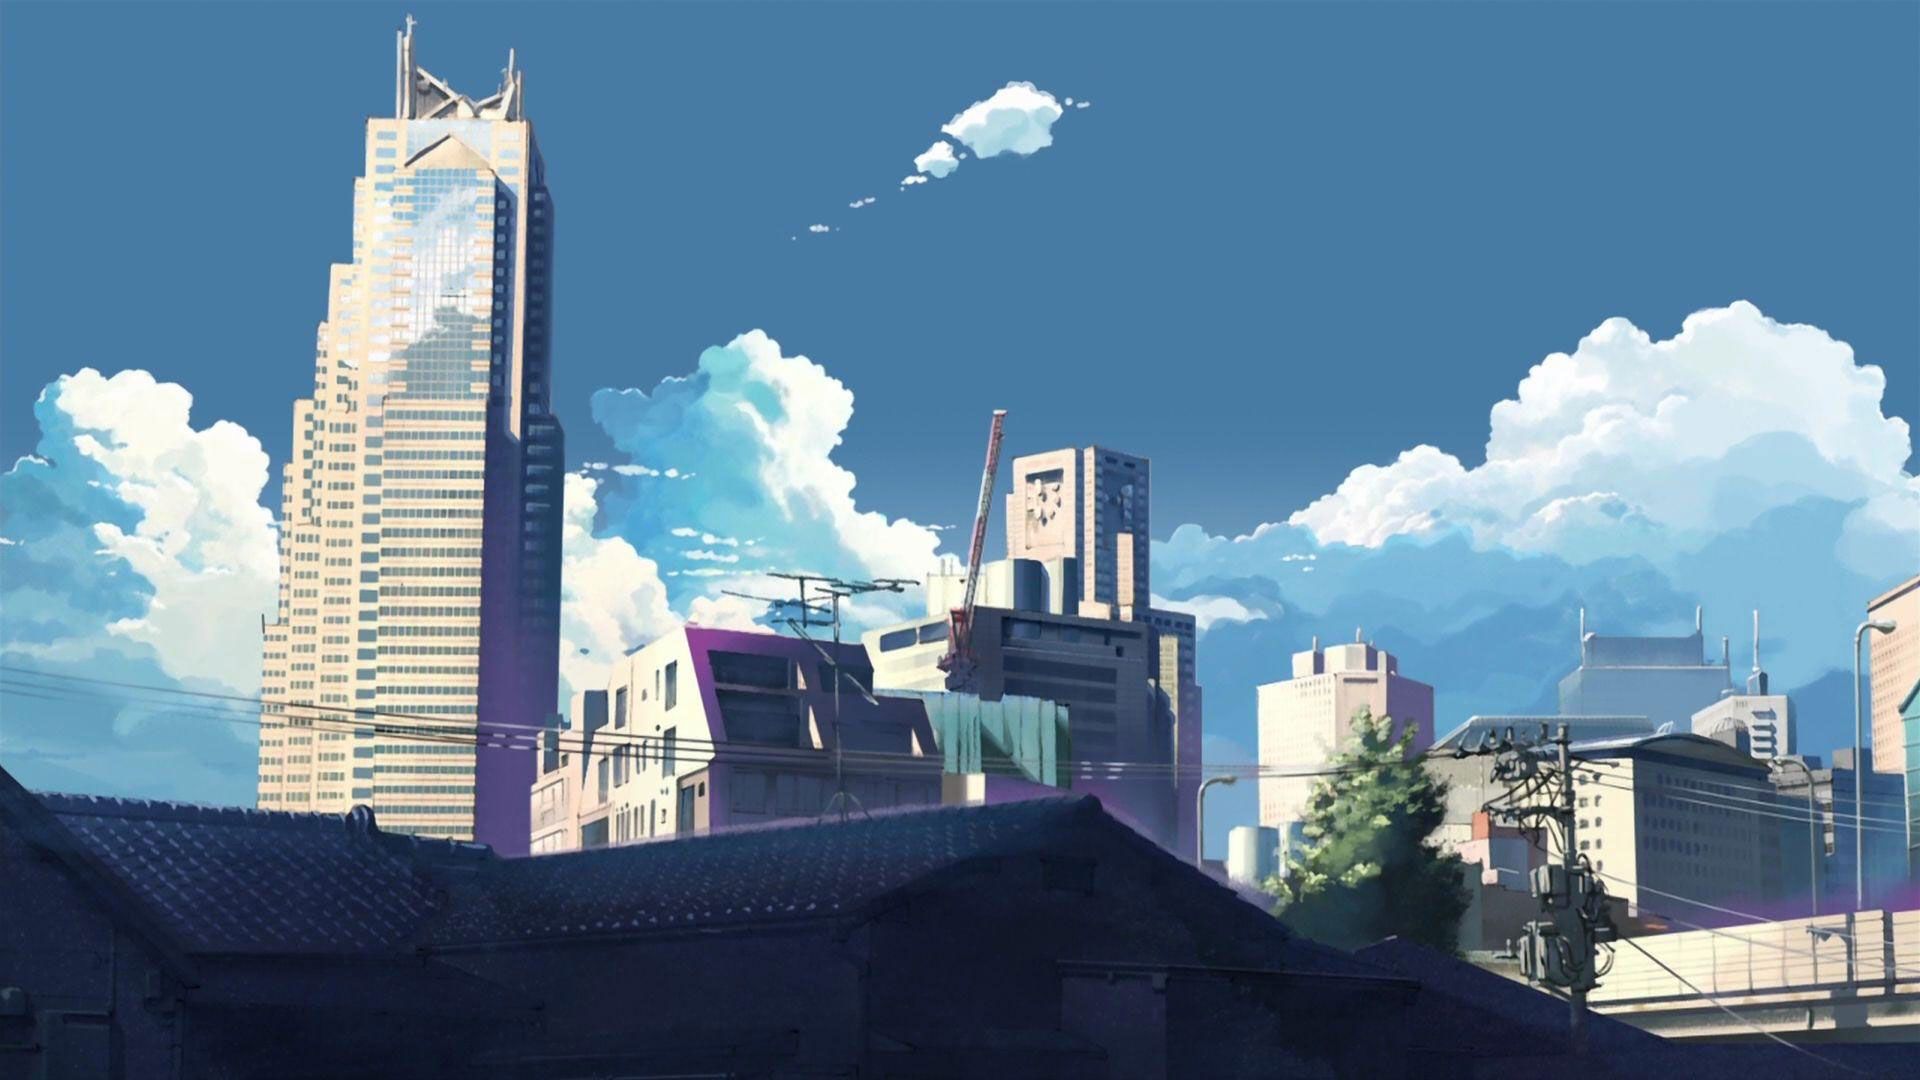 A city with tall buildings and clouds - Retro, desktop, cityscape, 1920x1080, 90s anime, anime, blue anime, anime city